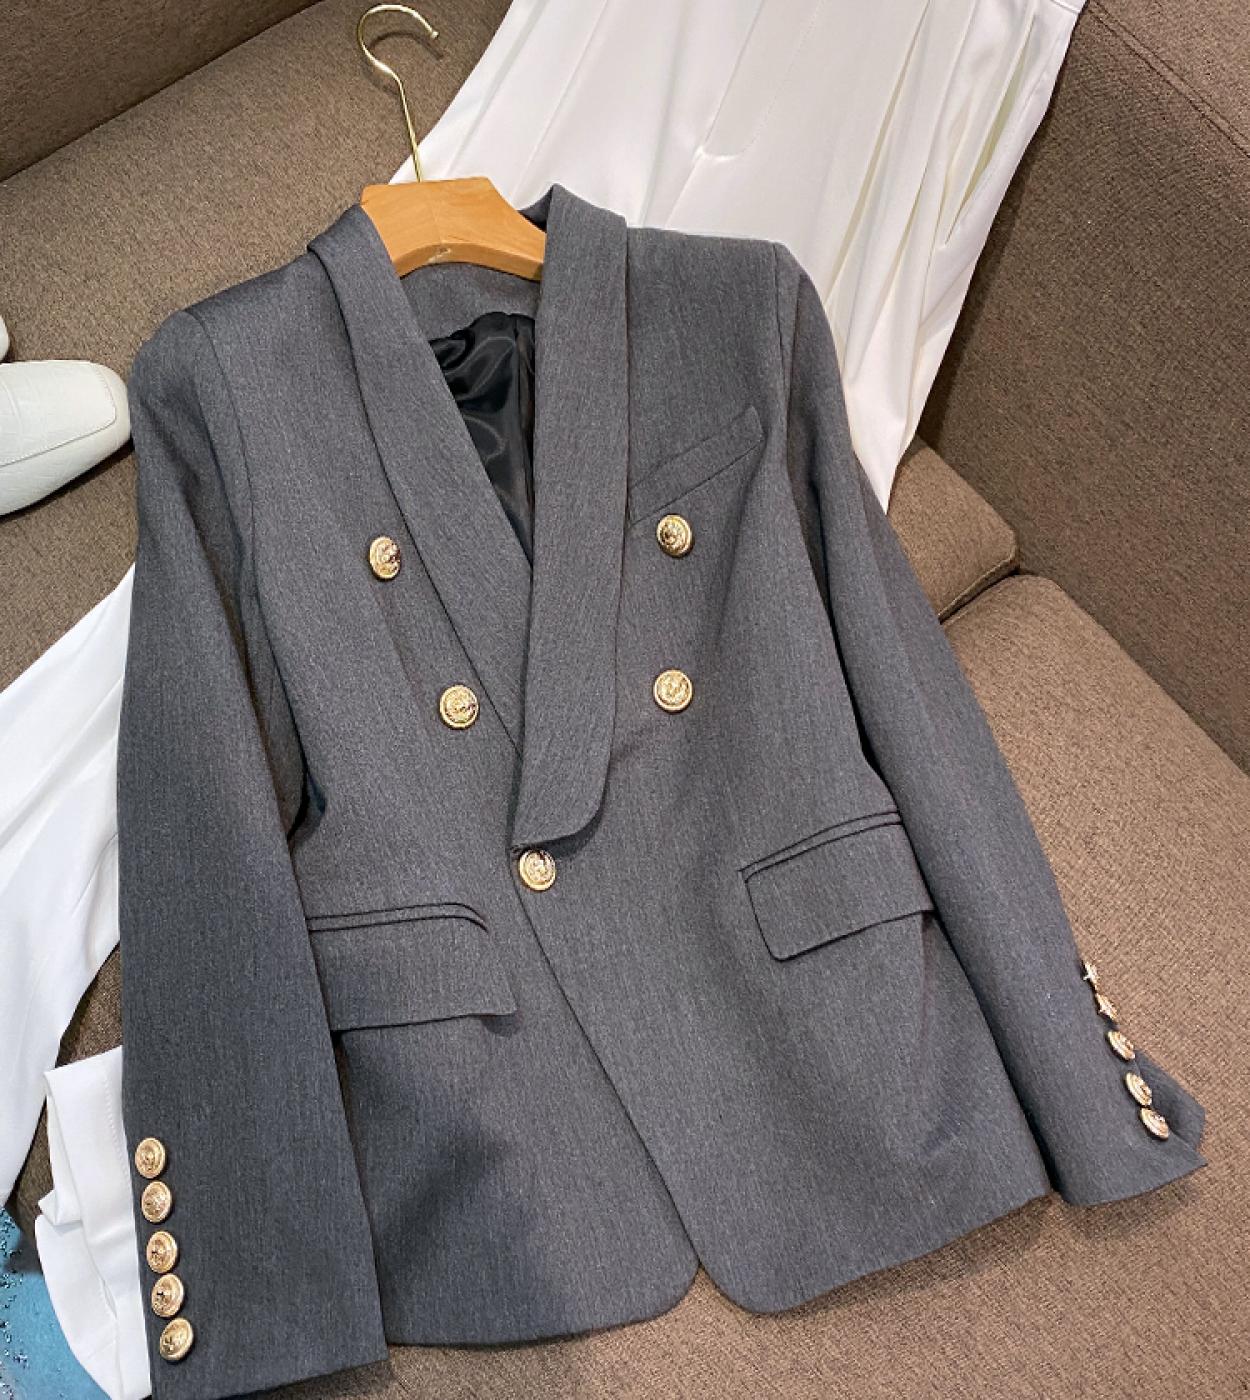  Star Style Womens Suit Jacket Fashion Lion Head Metal Buckle Double Breasted High Quality Green Fruit Color Suit O160j